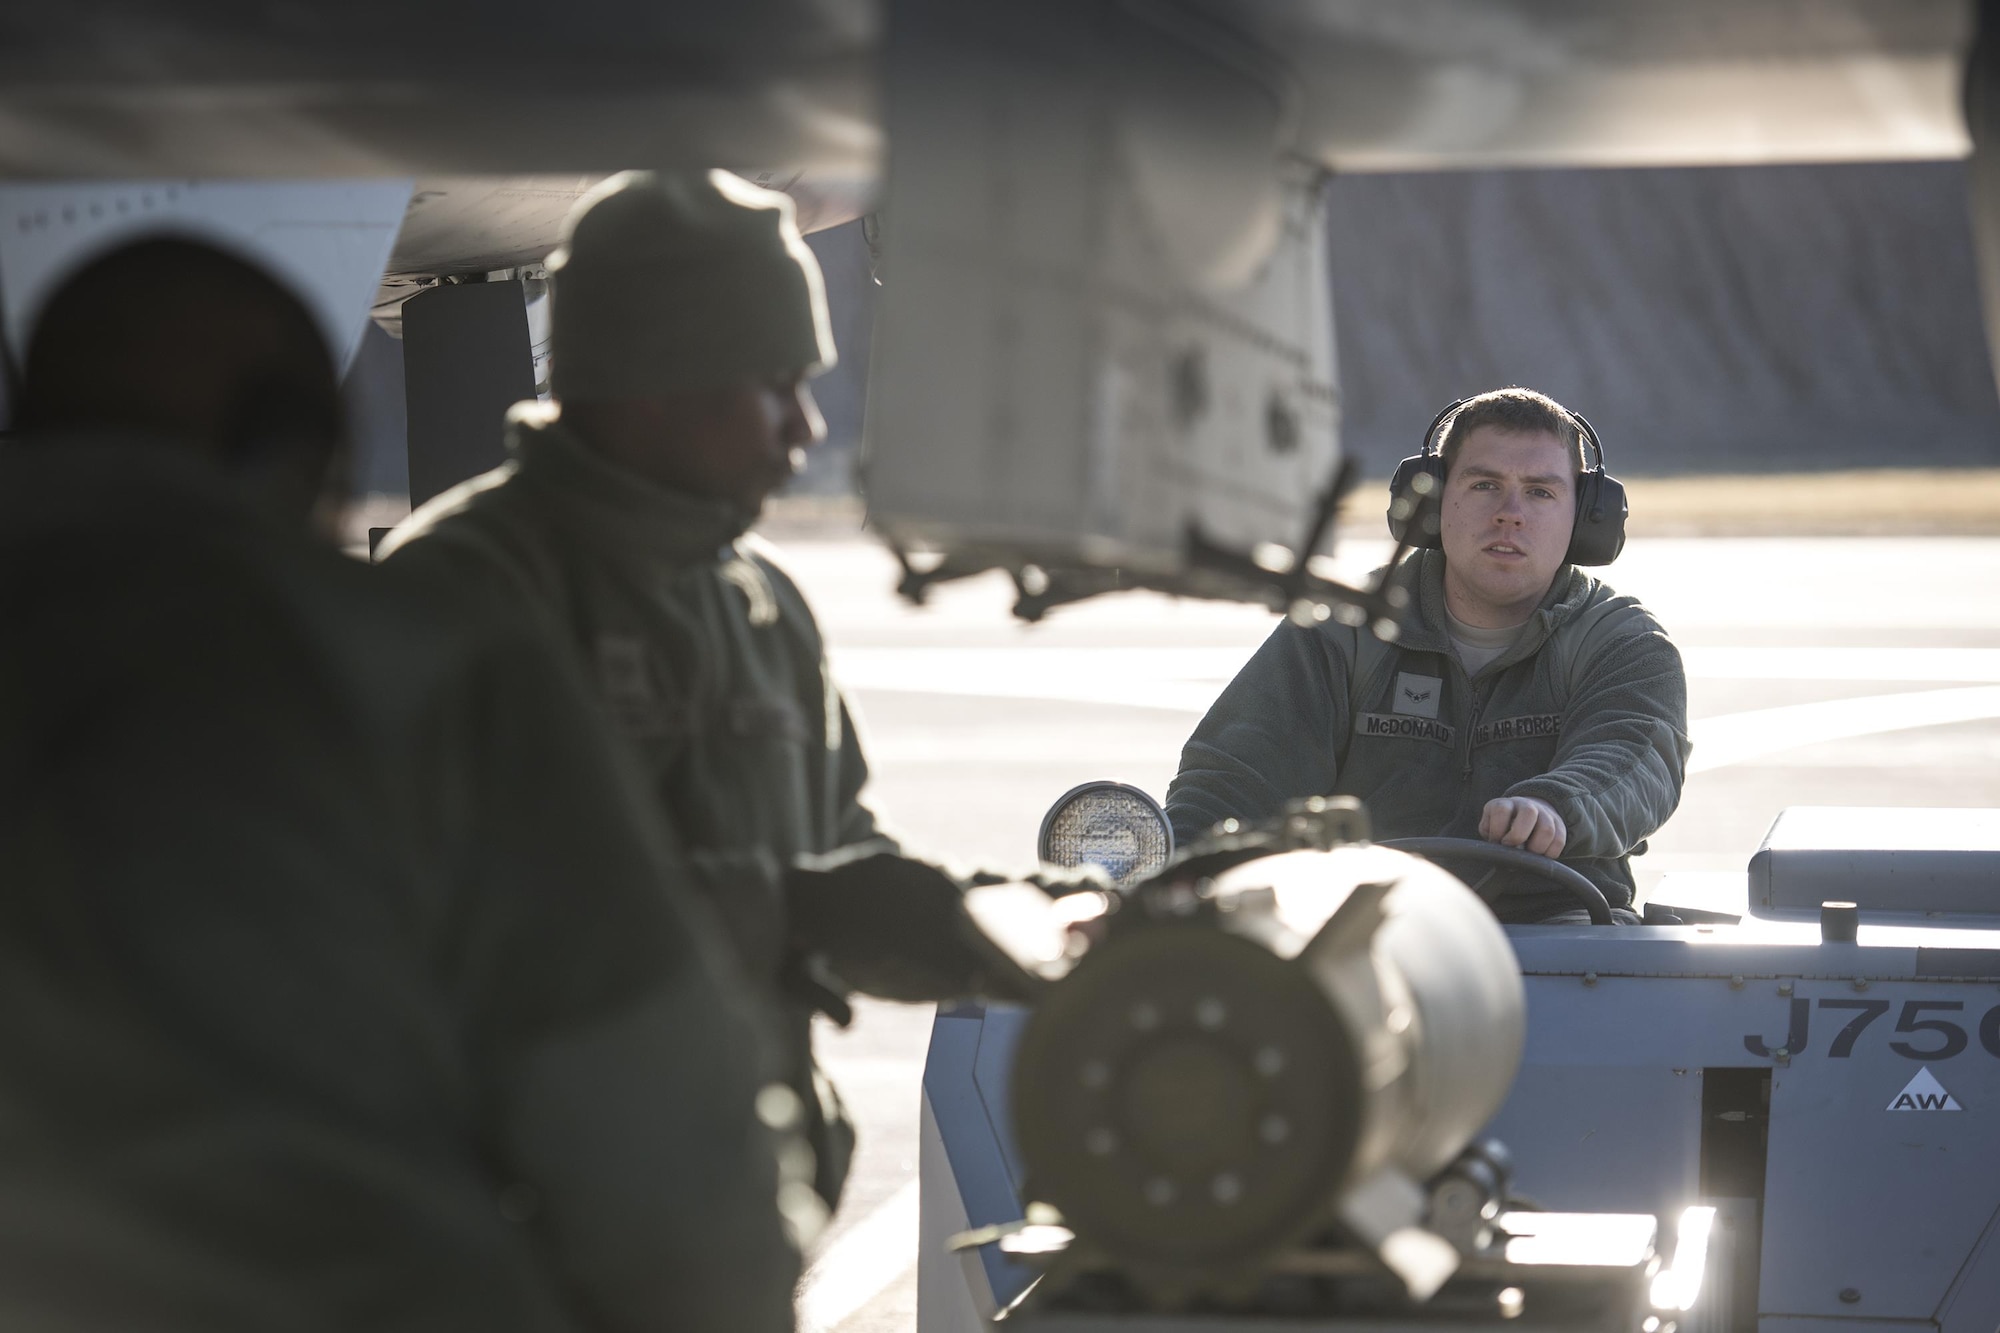 Airman First Class Connor McDonald, 74th Aircraft Maintenance Unit weapons load team member, operates an MJ-1C bomb lift while weapons load team member guide a Mark 82 general purpose bomb to its place under an A-10C Thunderbolt II during Green Flag-West 17-03, Jan. 24, 2017, at Nellis Air Force Base, Nev. Weapons Airmen enabled joint force training during the two-week exercise by loading weapons, inspecting jets and maintaining munitions systems. Some of the live munitions included the Mark 82 and 84 general purpose bombs, high-explosive incendiary 30mm rounds and the 500 pound GBU-12 Paveway II laser-guided bomb. (U.S. Air Force photo by Staff Sgt. Ryan Callaghan)